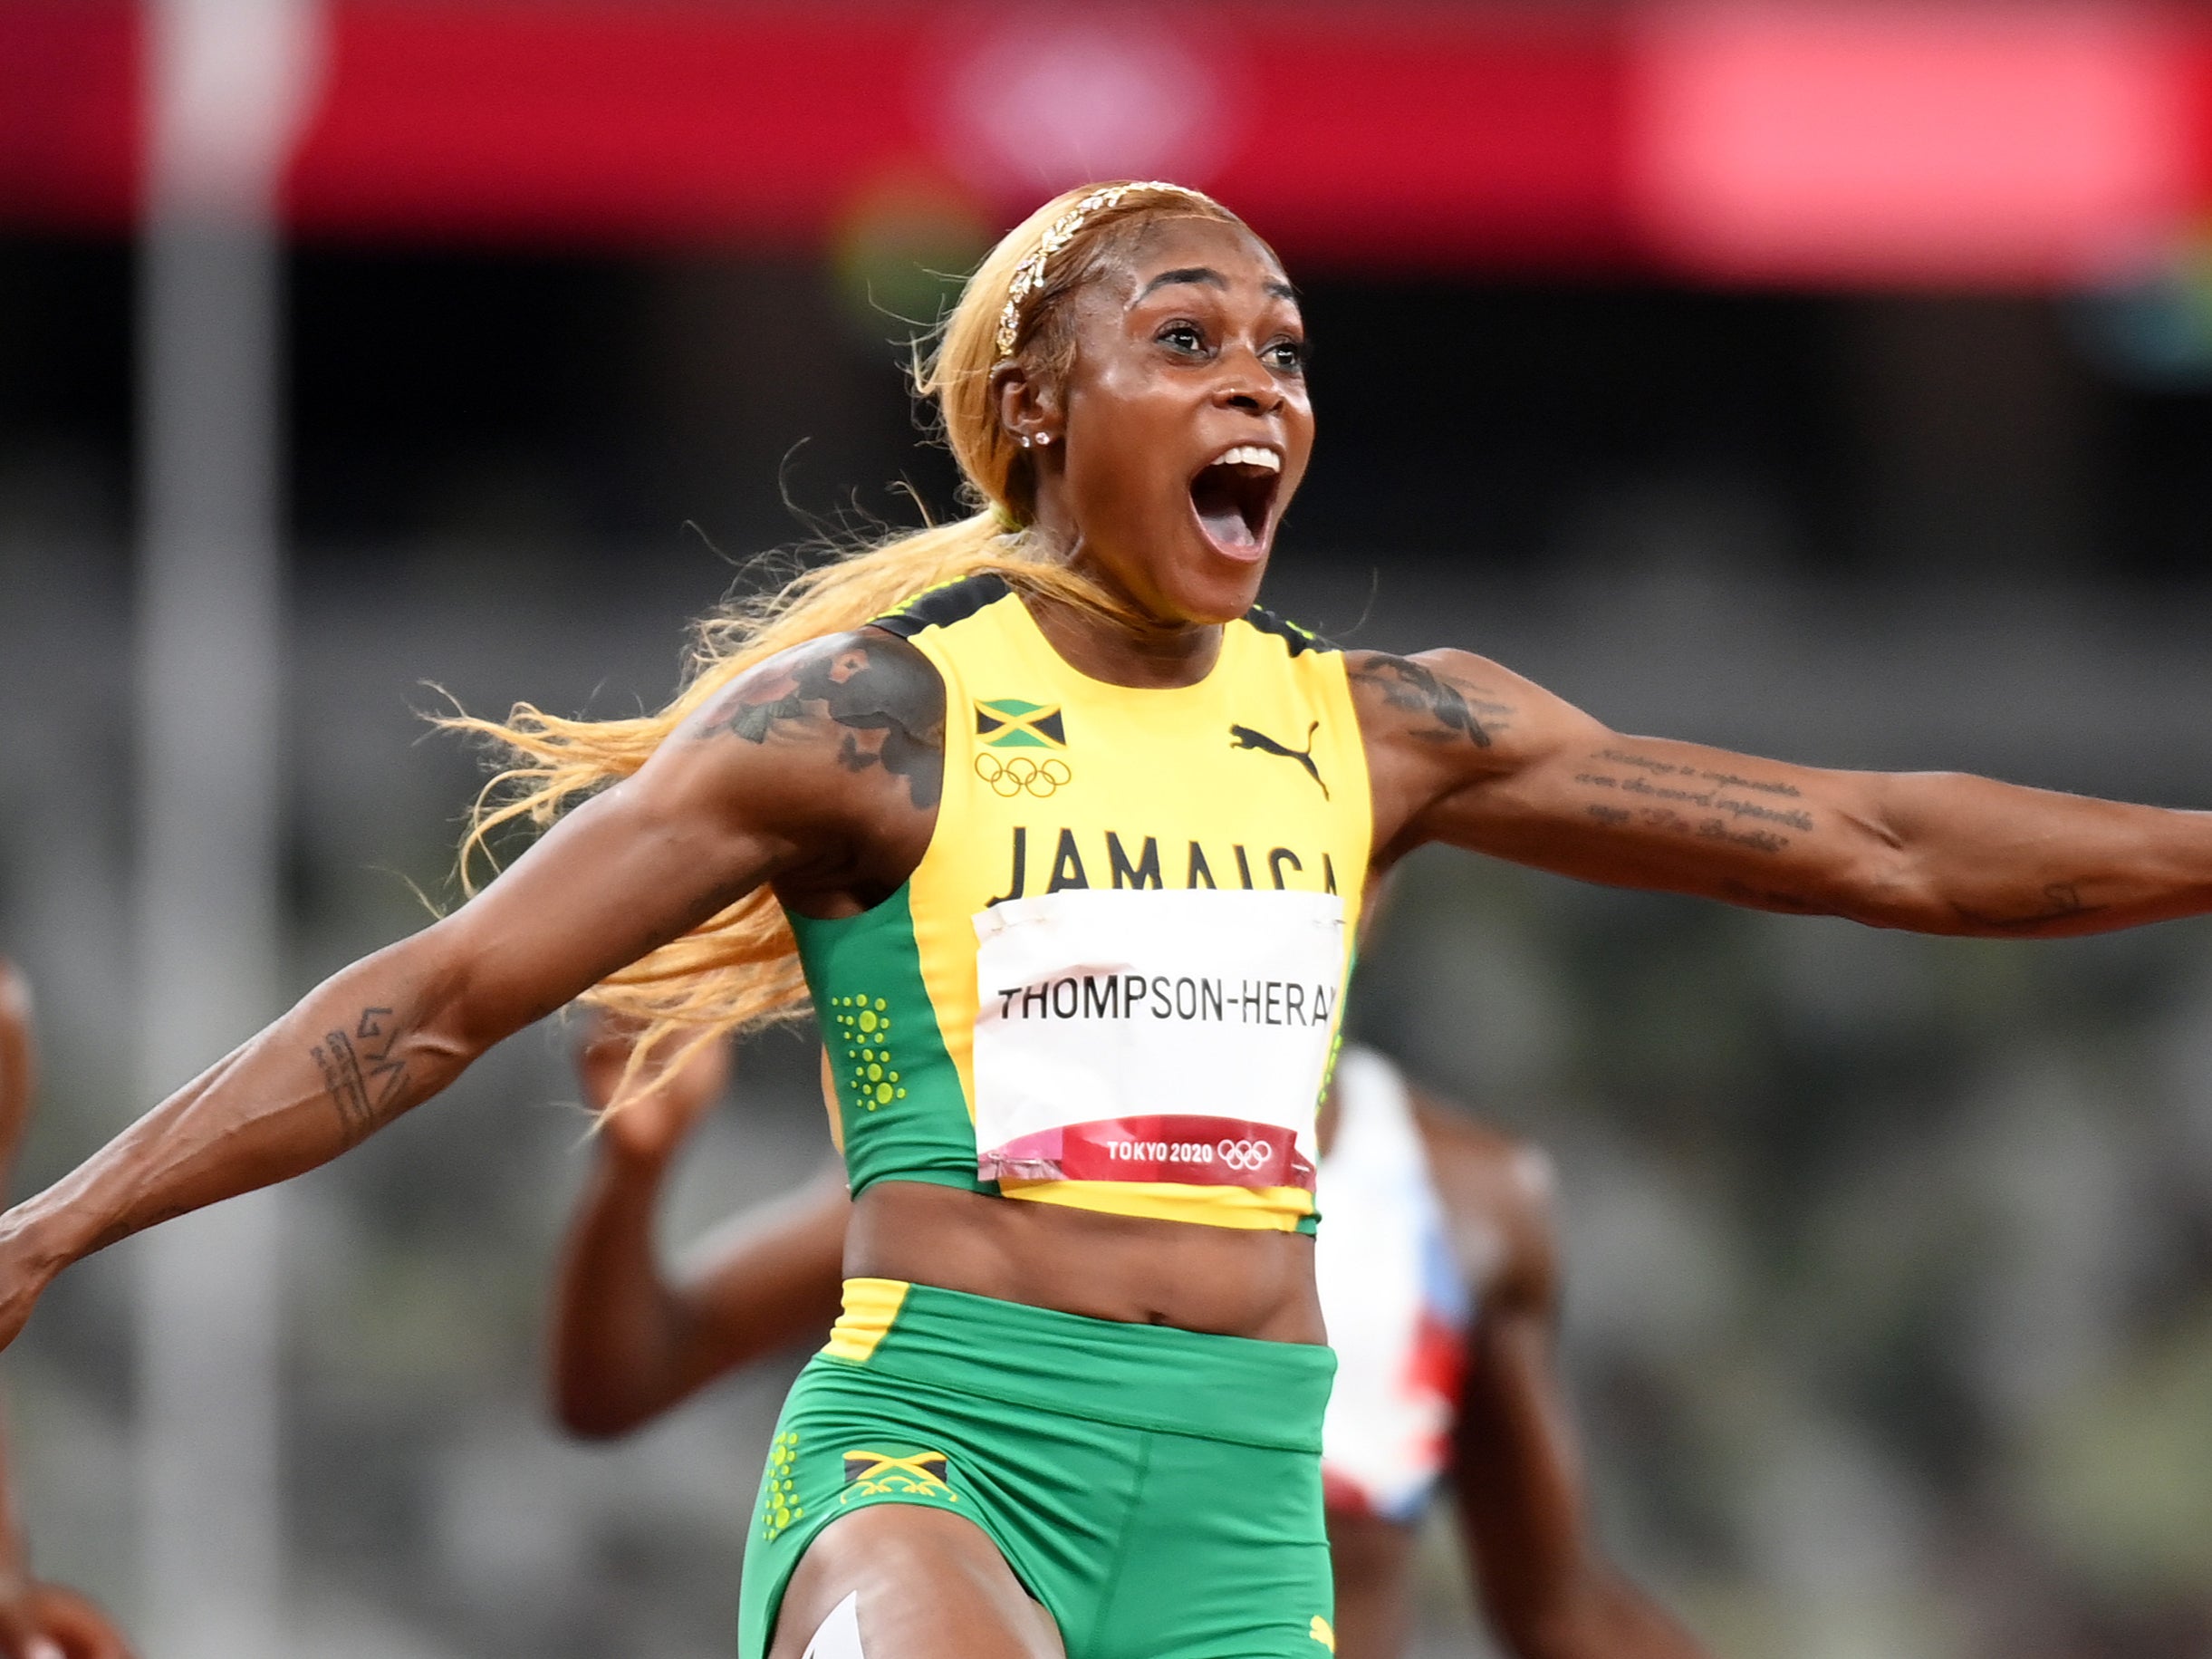 Elaine Thompson-Herah of Team Jamaica crosses the finish line to win the gold medal